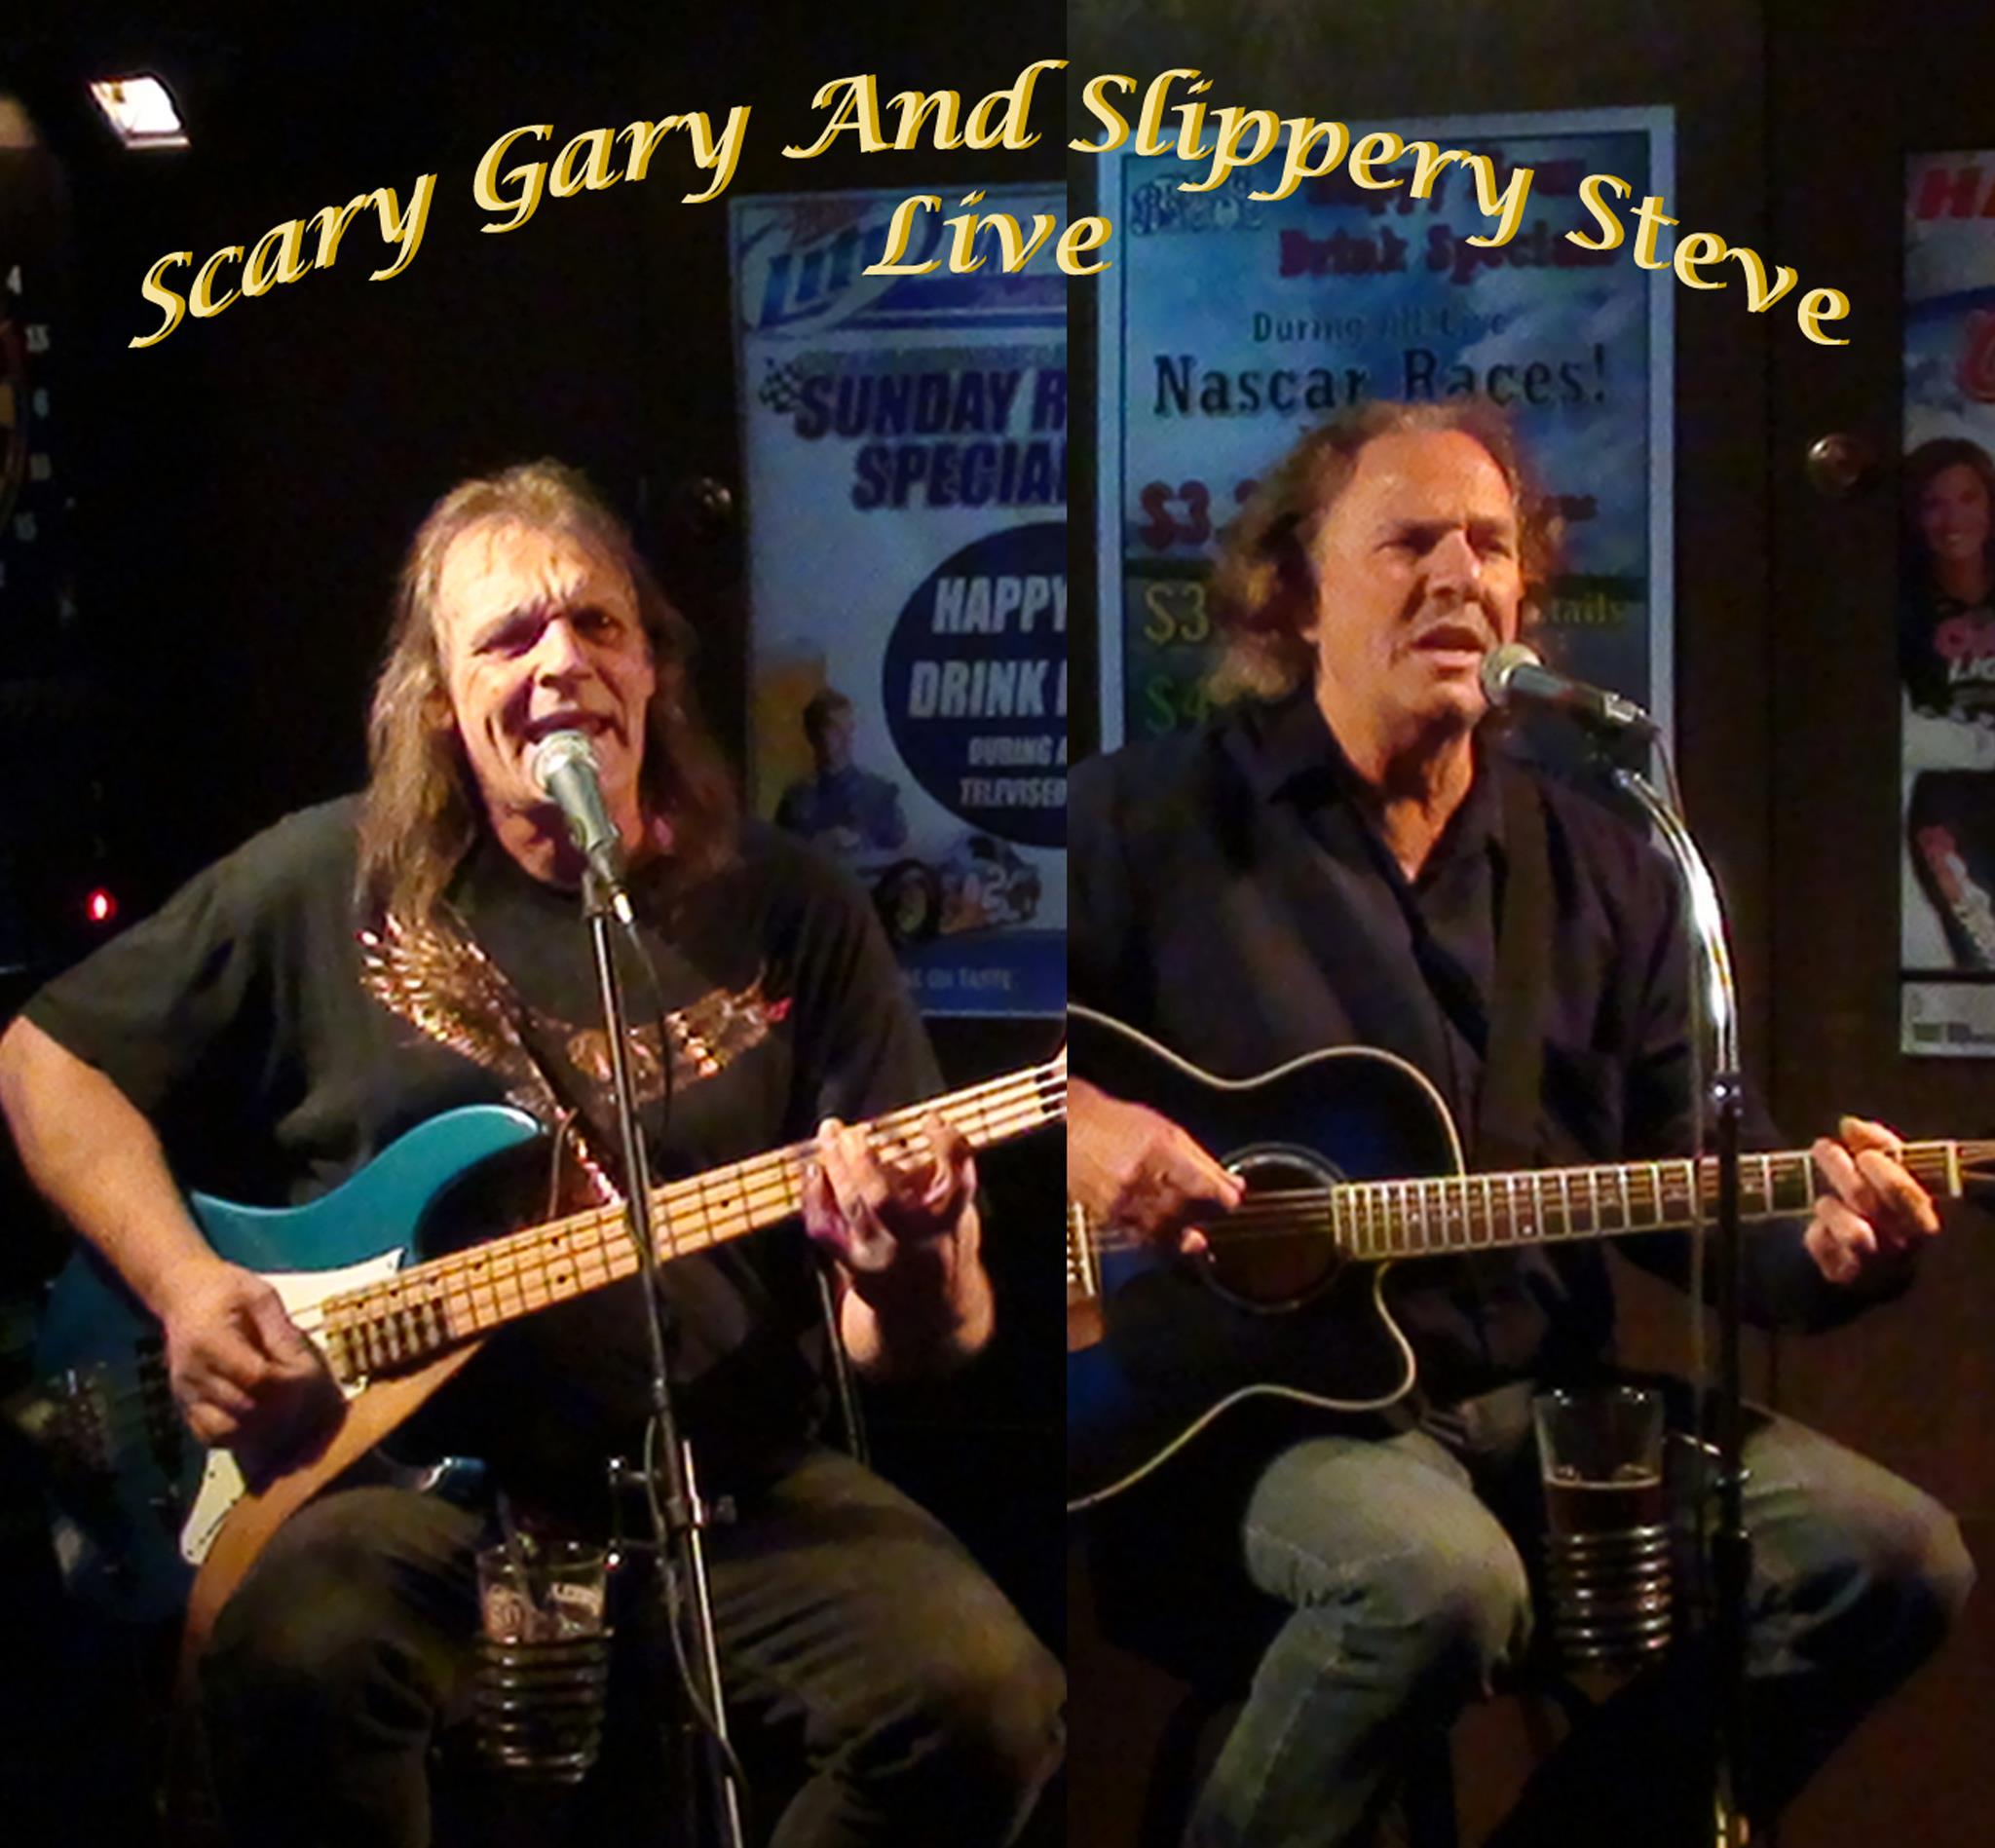 Slippery Steve & Scary Gary on the Patio at Route 65 Pub n Grub